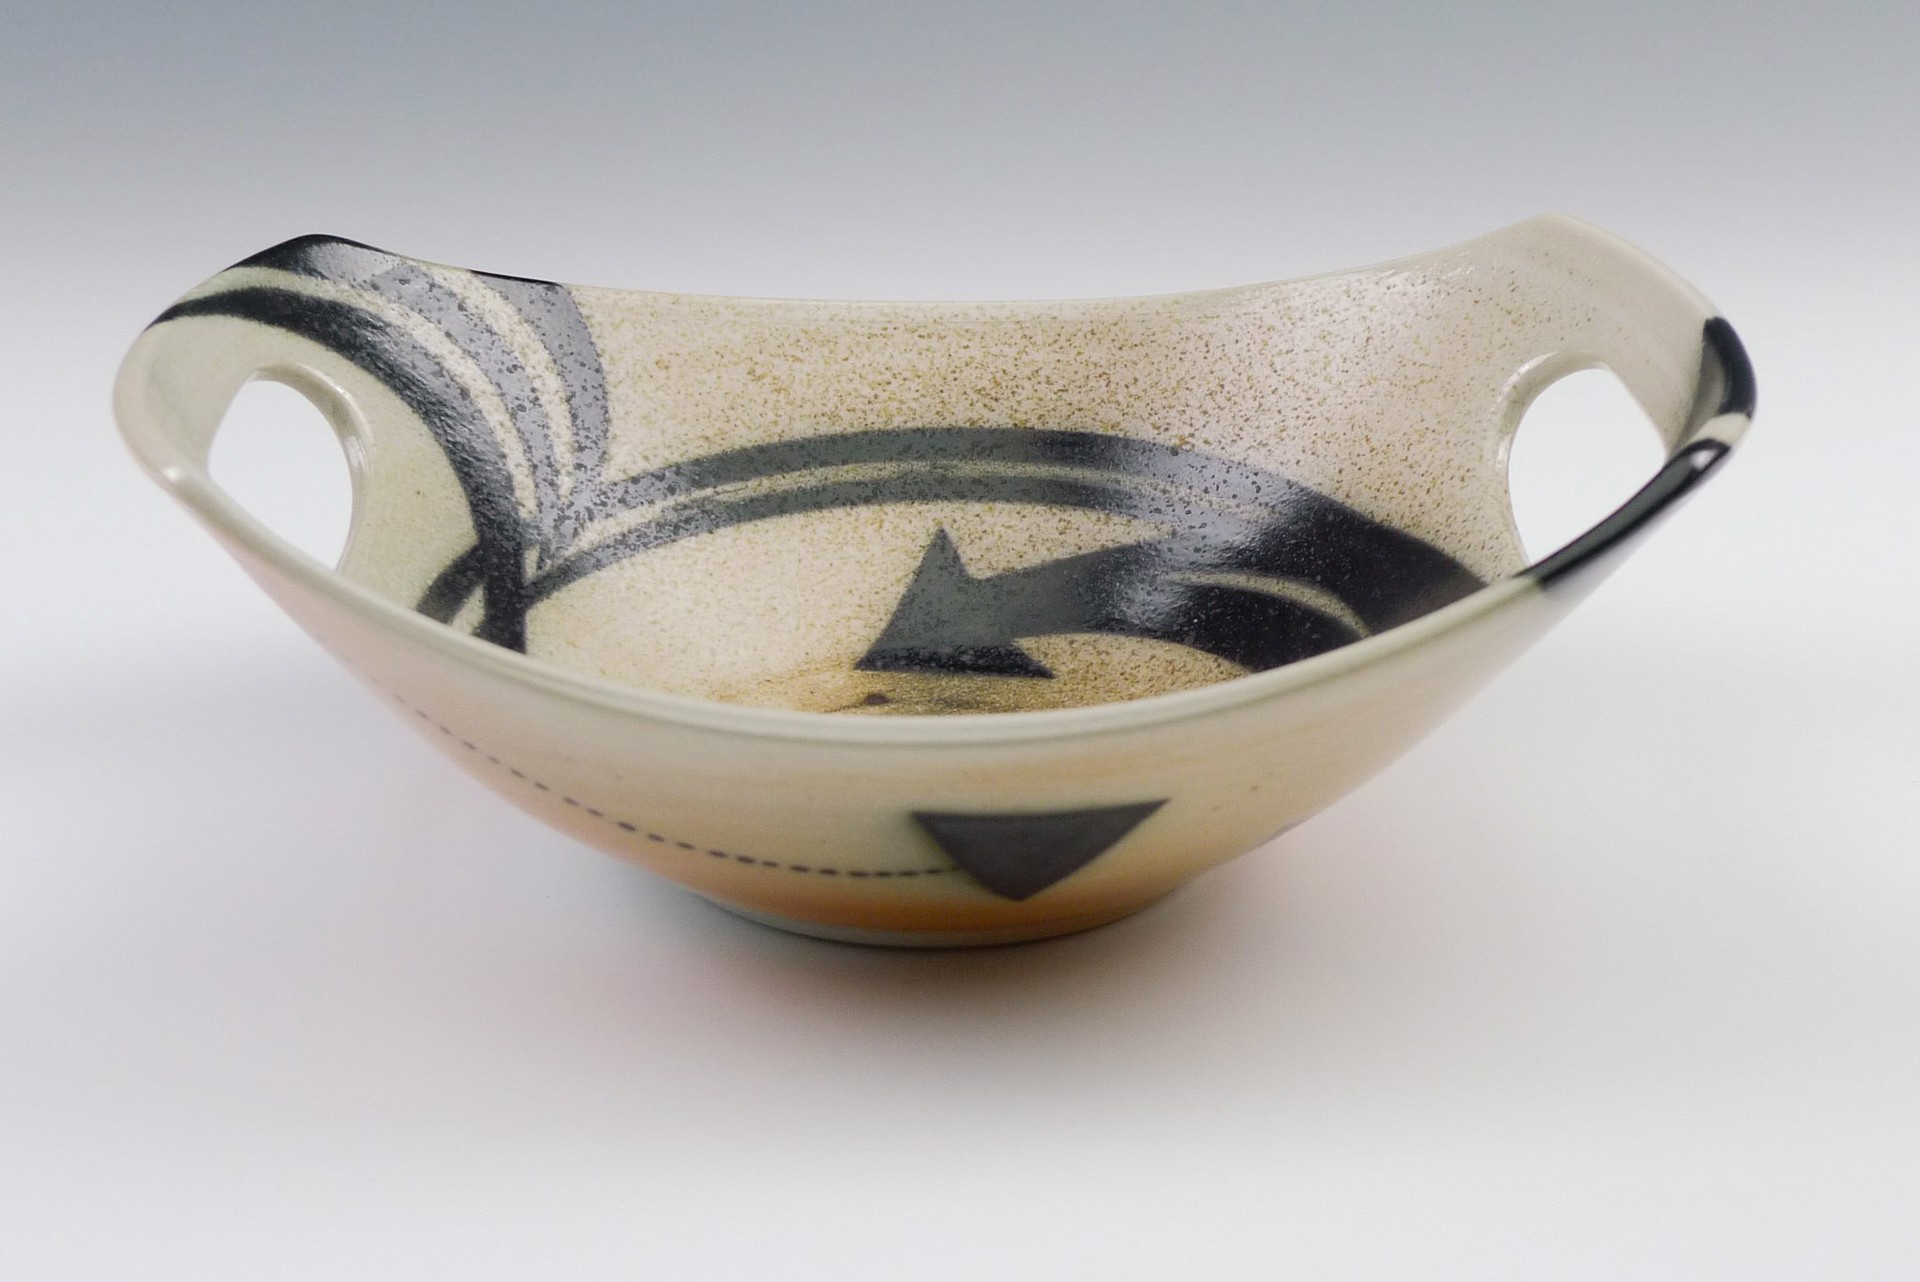 Bowl with Handles by Joanne Kirkland